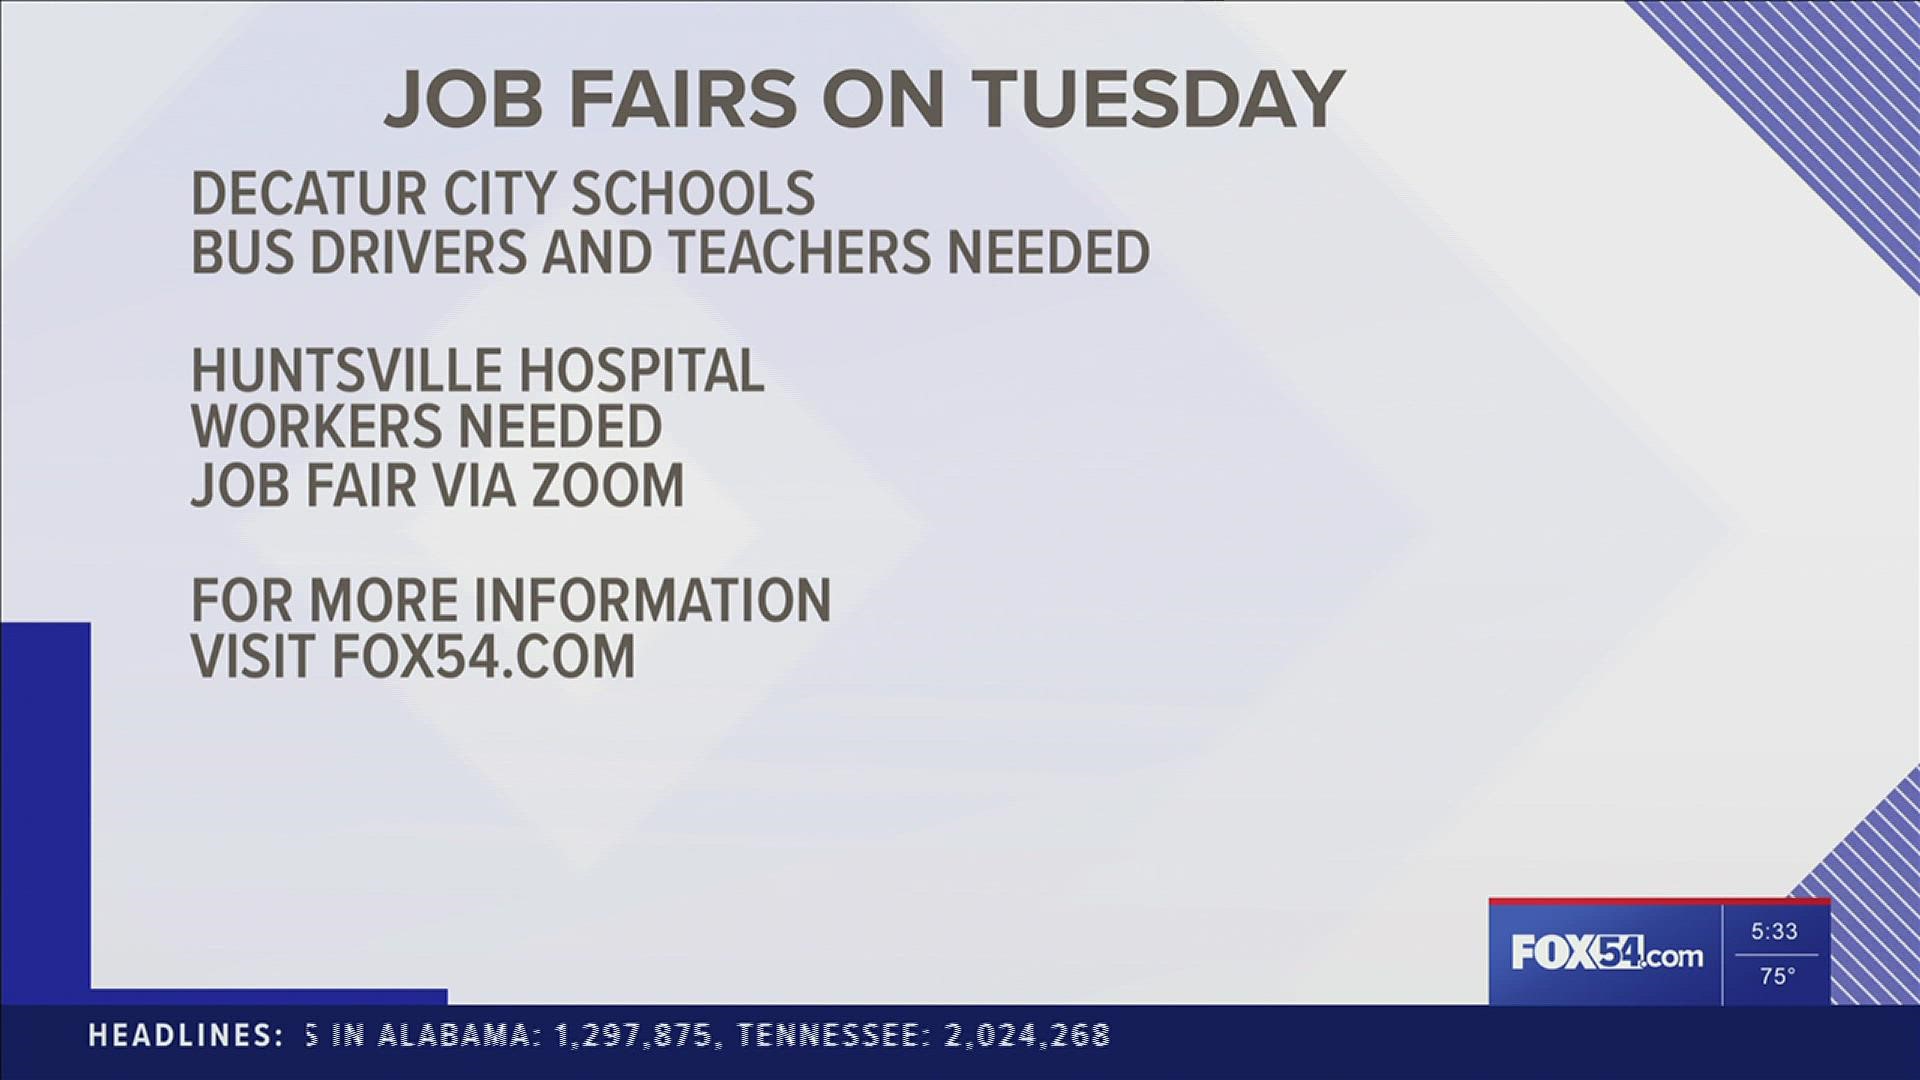 Decatur City Schools are in need of experienced bus drivers and teachers and are holding a job fair that day. Huntsville Hospital also is in need of workers.